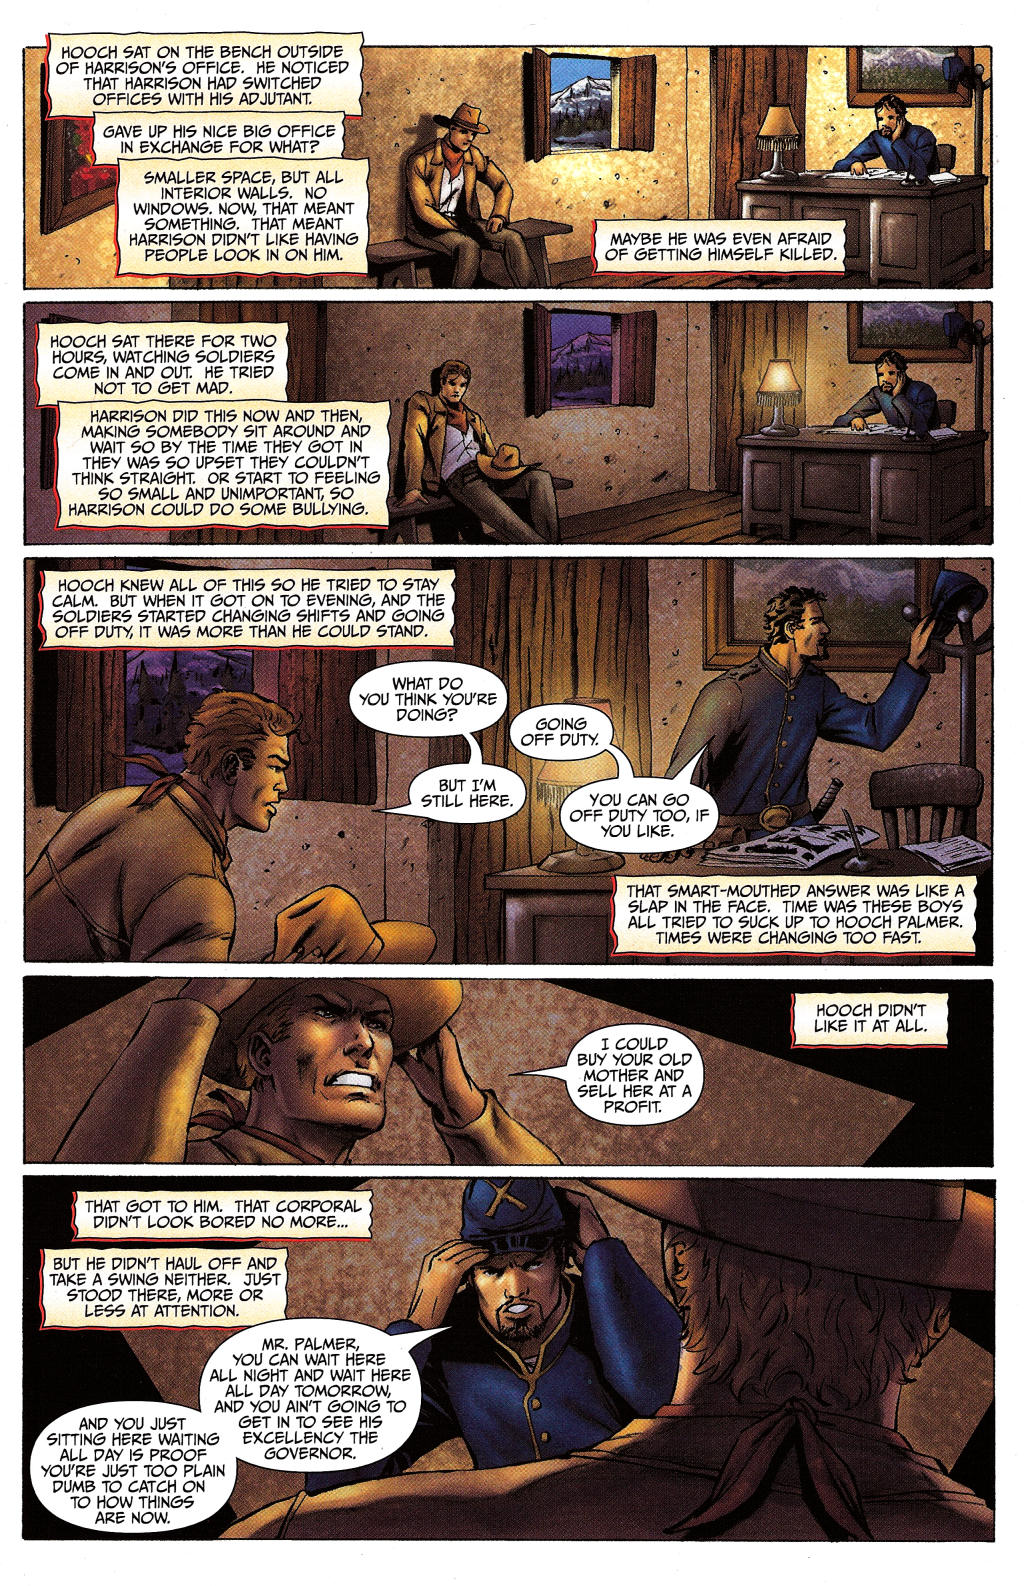 Red Prophet: The Tales of Alvin Maker issue 4 - Page 5